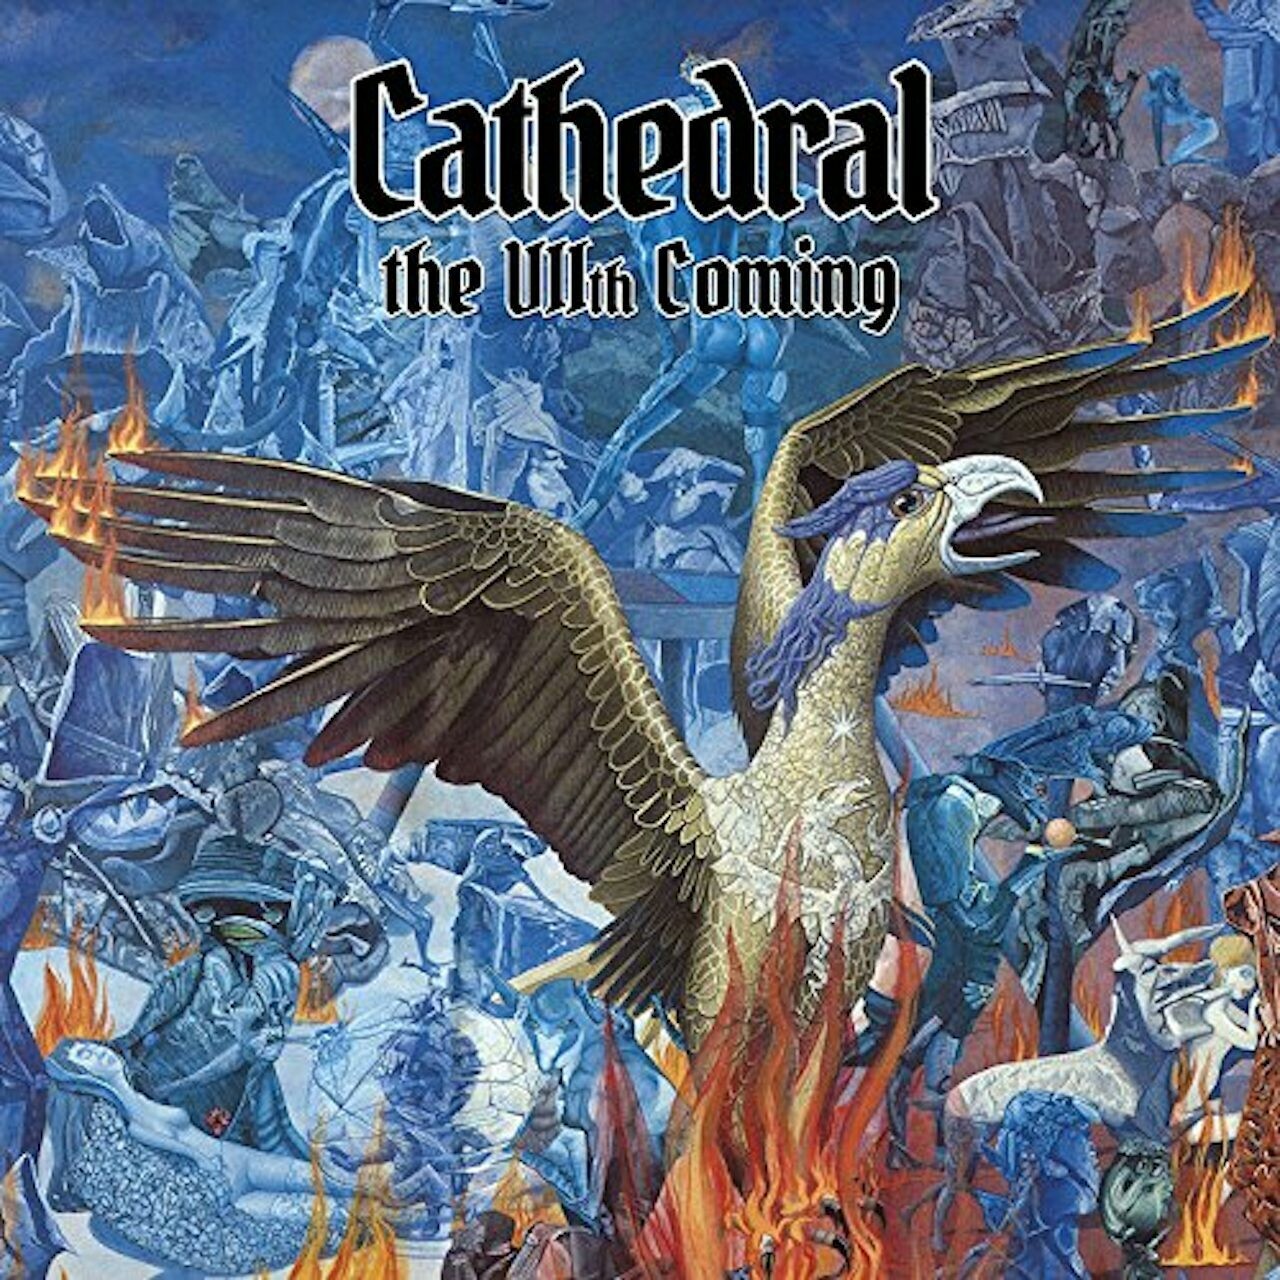 Catherdral / Viith Coming